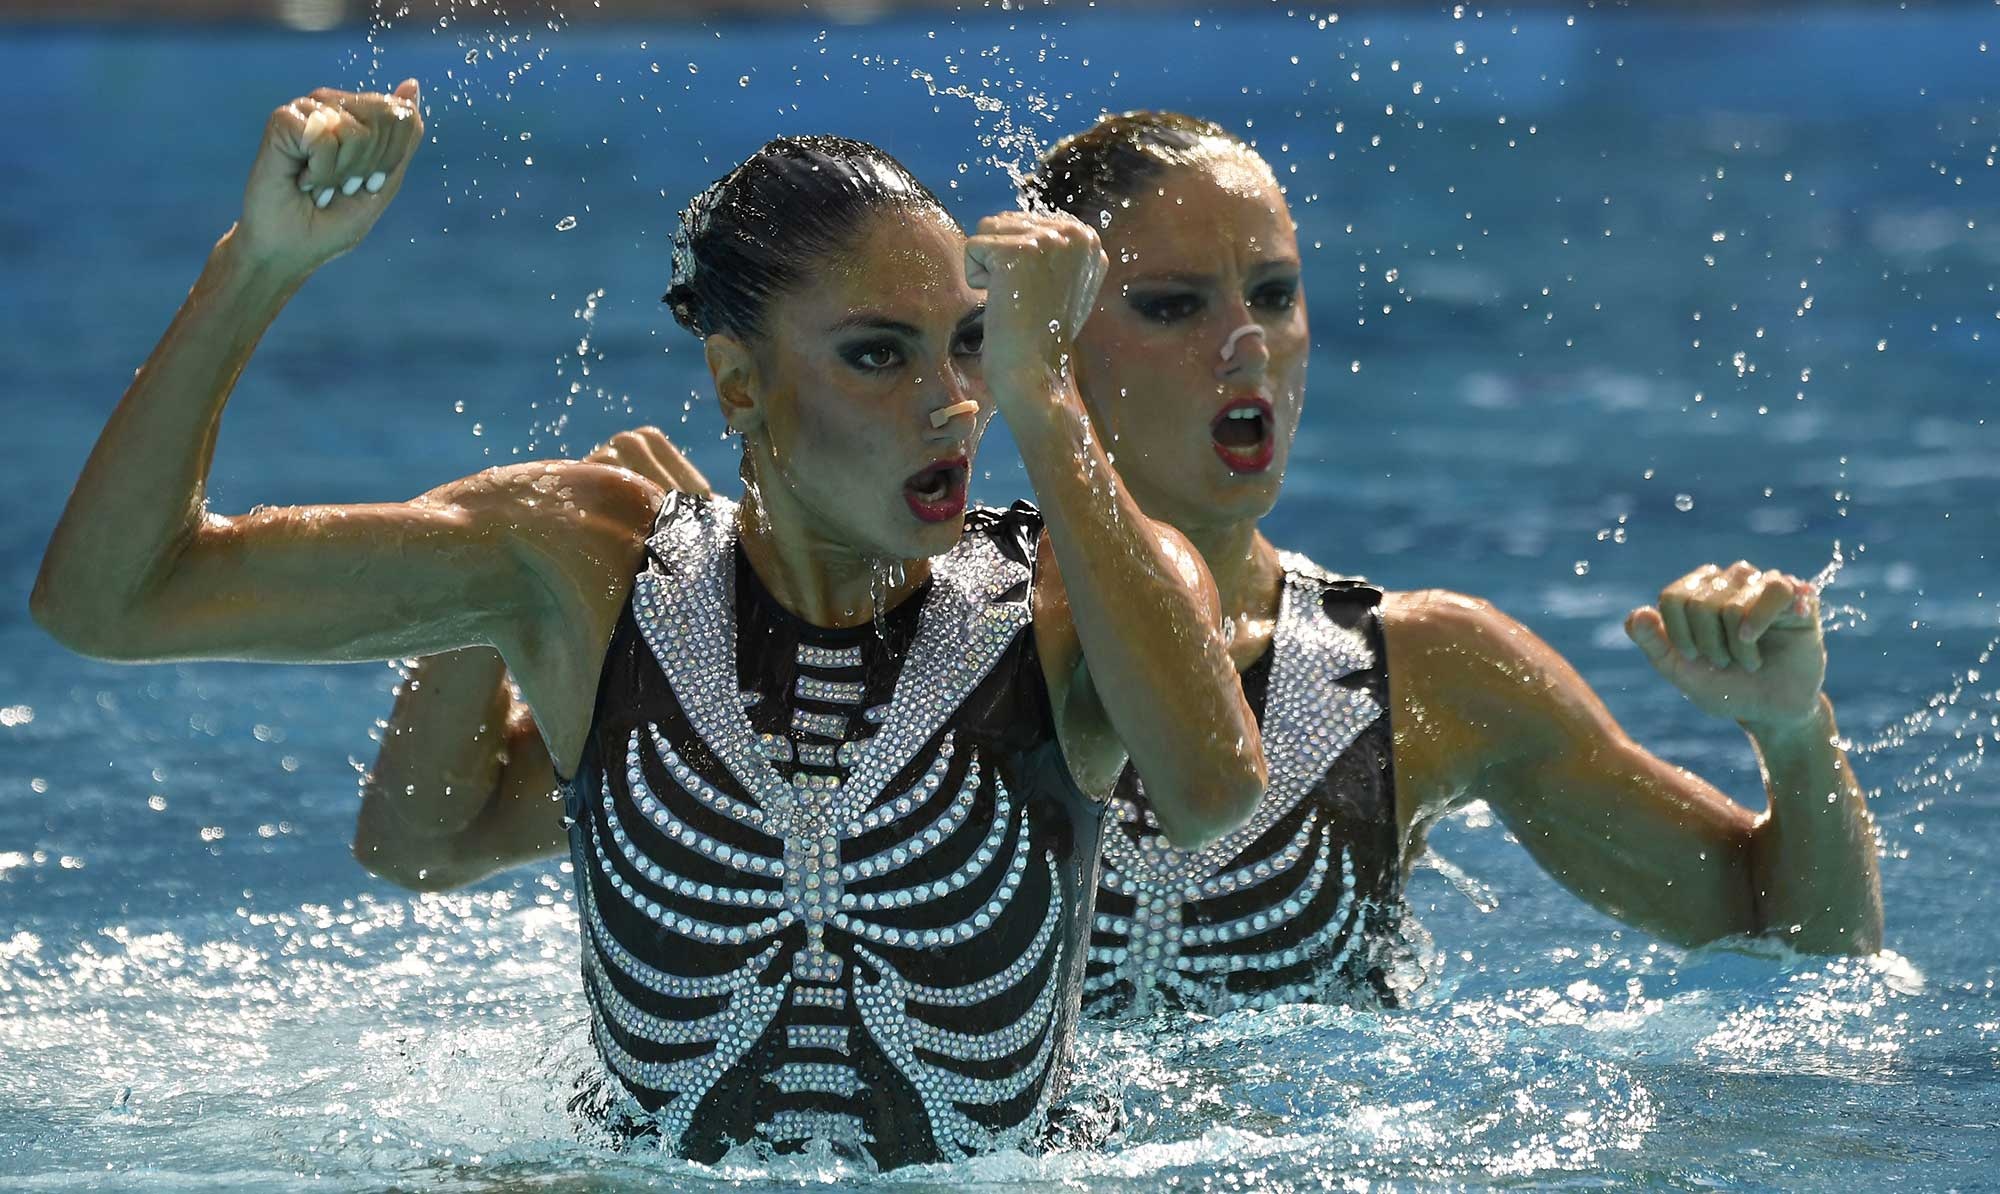 Synchronized Swimming: Greece's Evangelia Platanioti and Evelina Papazoglou compete in the Duets Technical Routine final, Rio 2016. 2000x1200 HD Wallpaper.